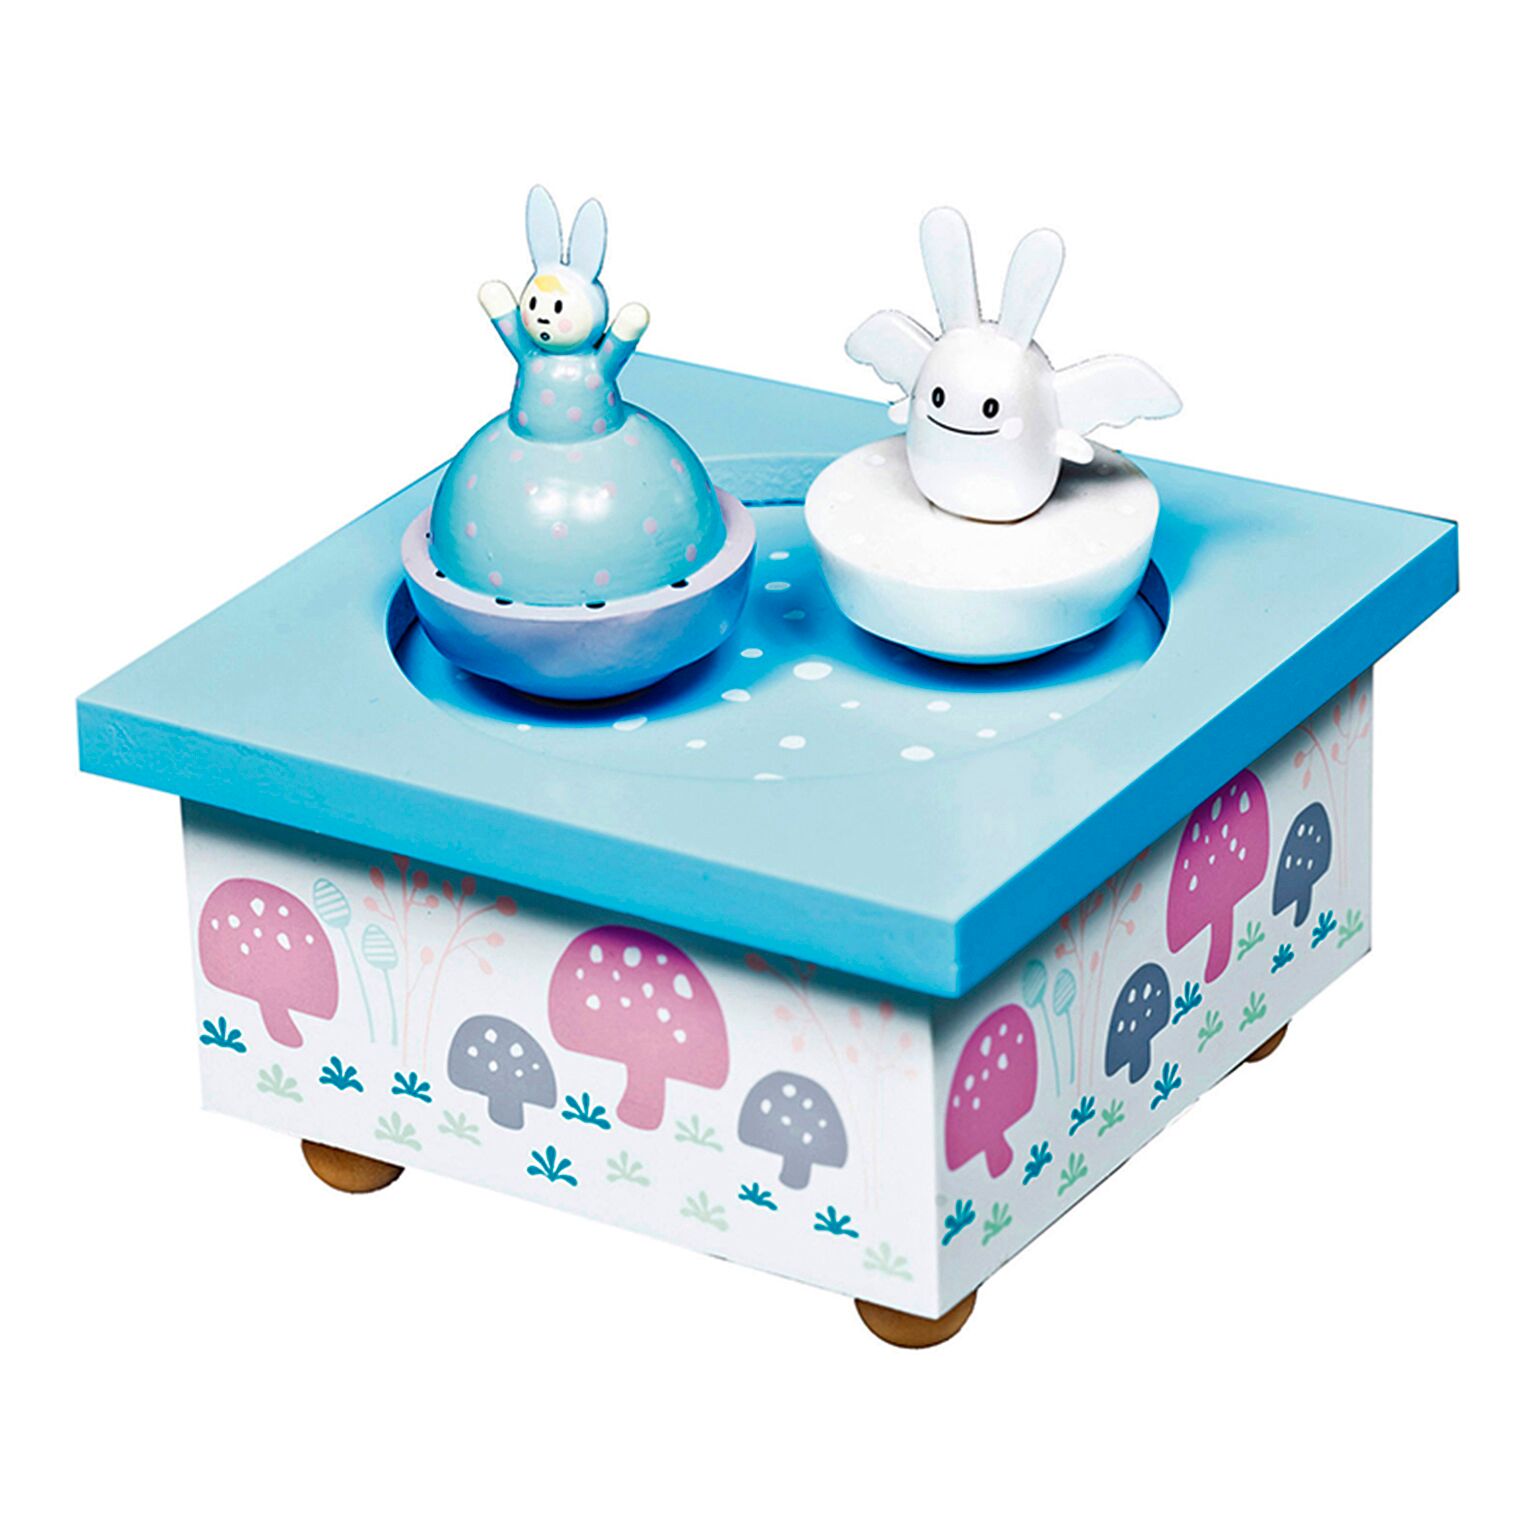 Trousselier musical wooden box ange lapin, blue/pink